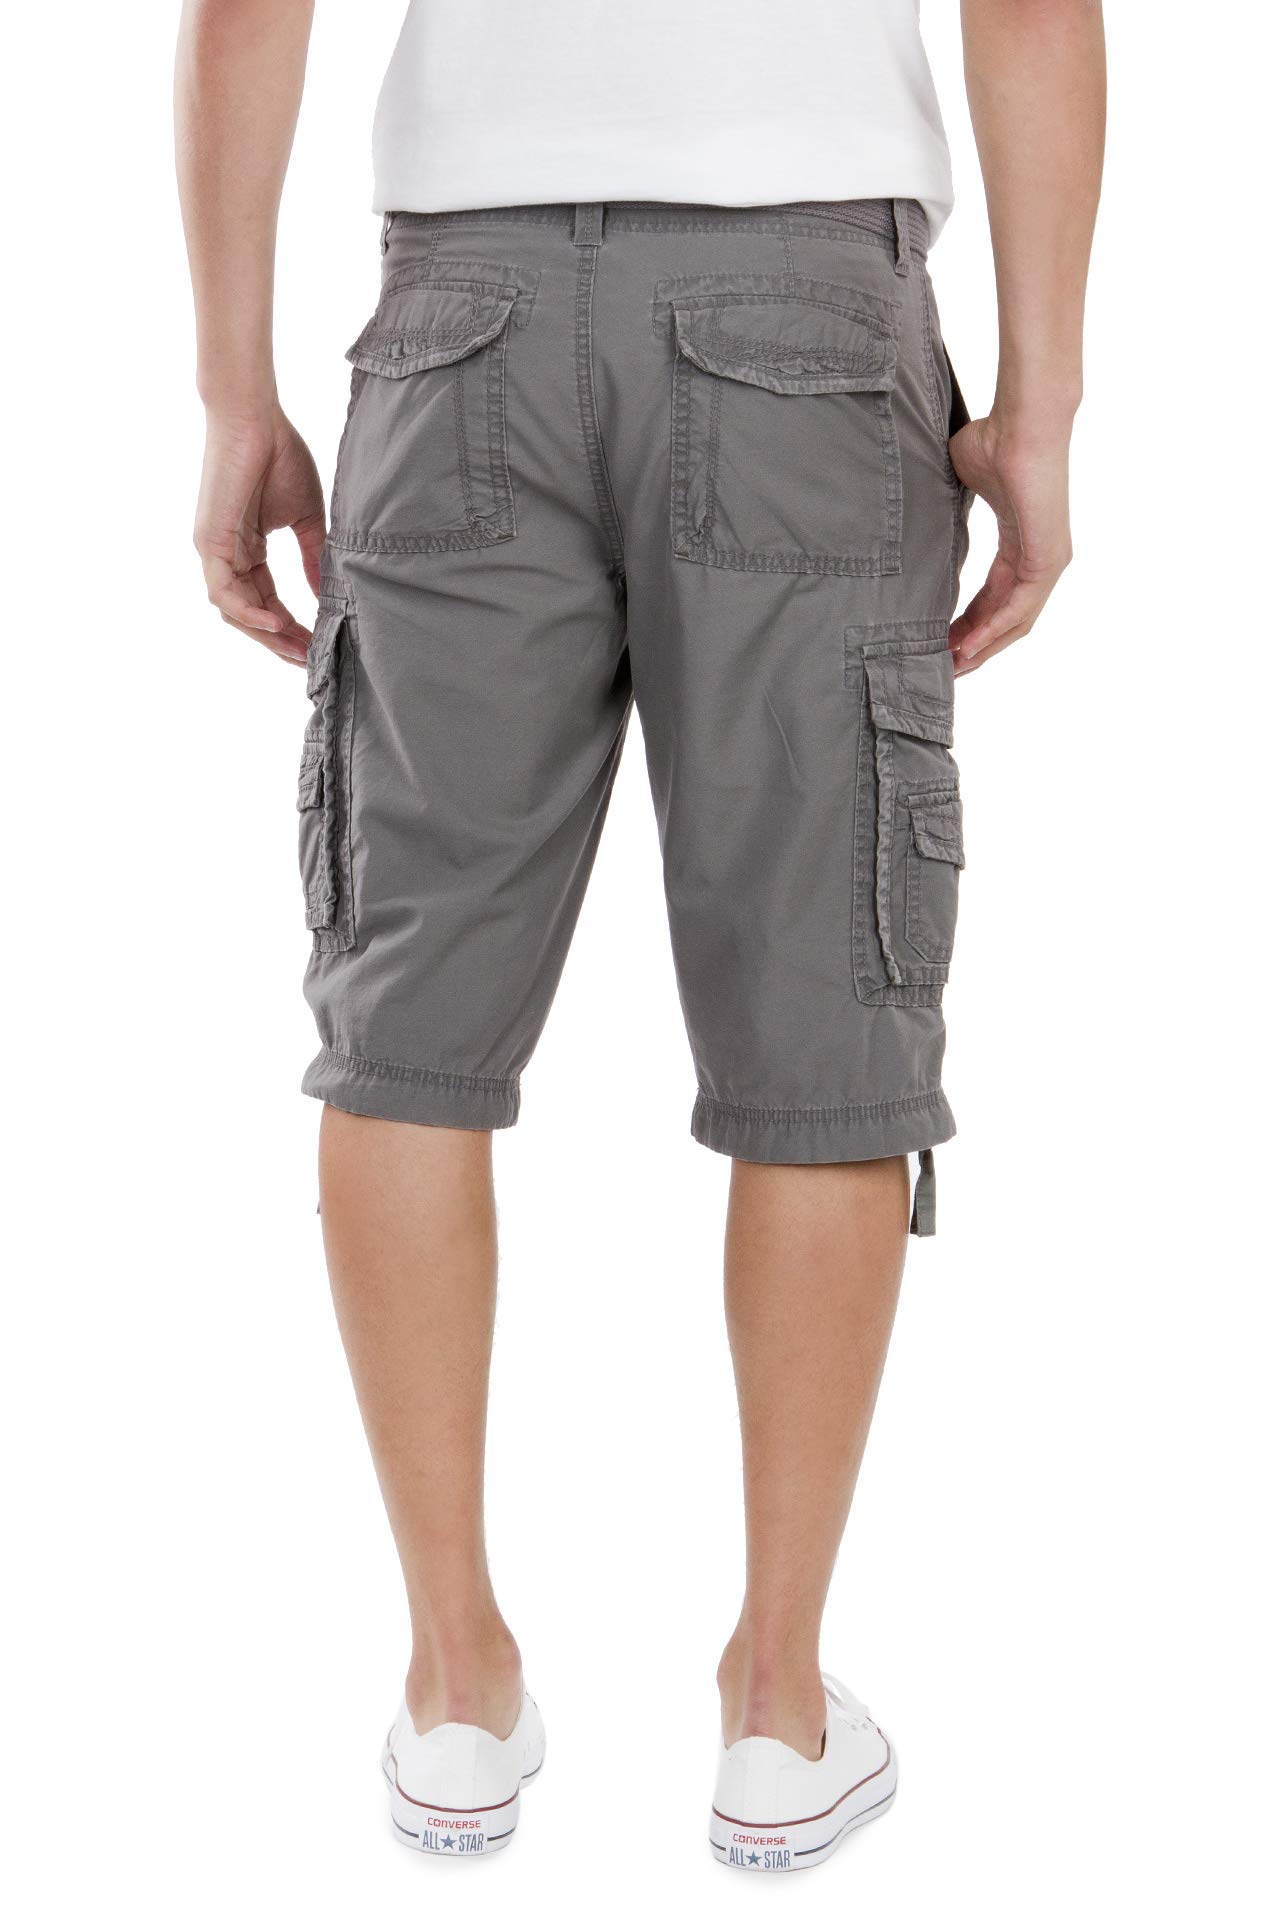 Unionbay Men's Cordova Belted Messenger Cargo Short - Reg and Big and Tall Sizes